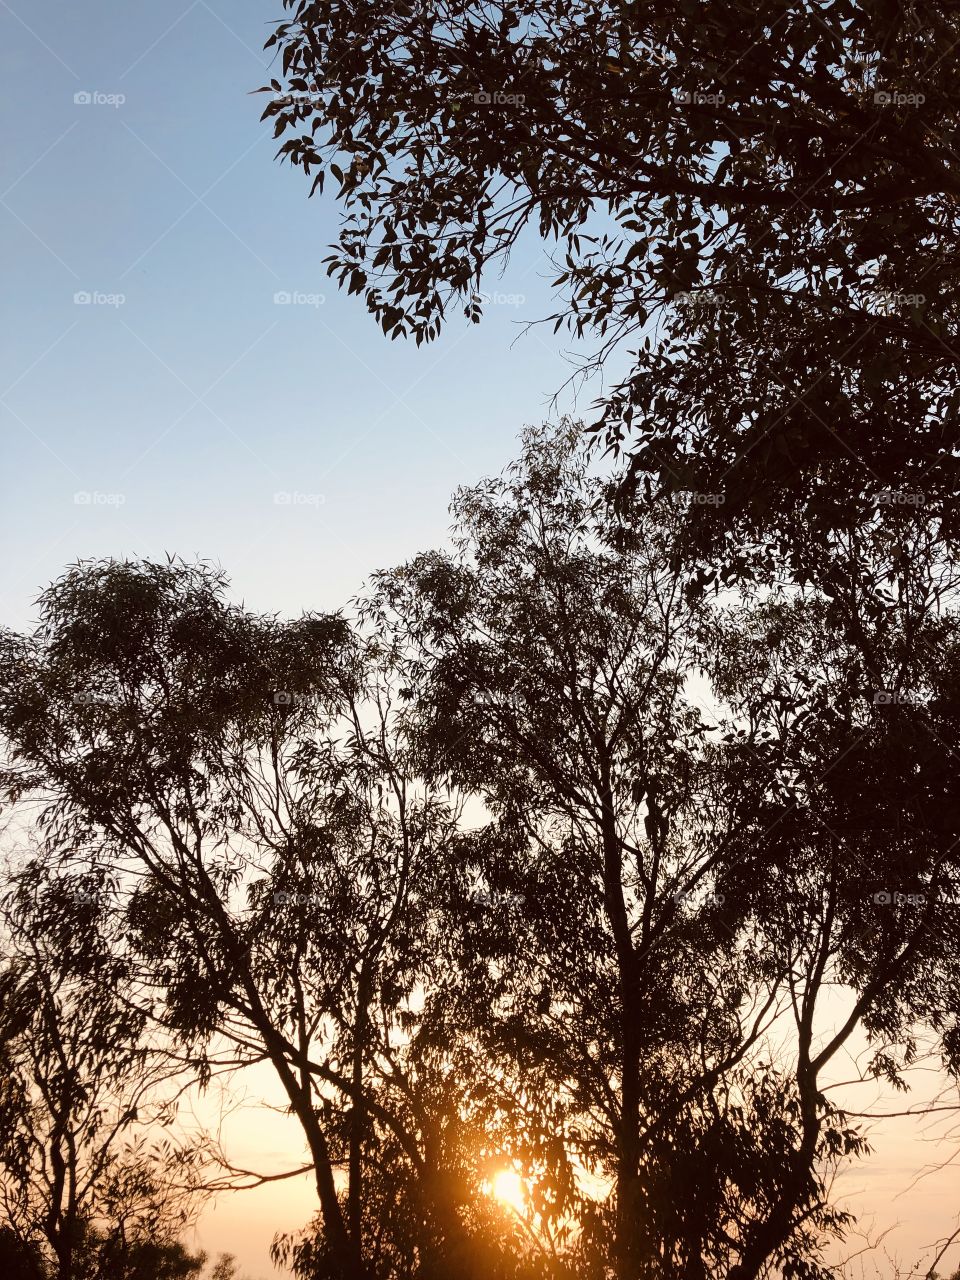 28th August, 2019. Sunset between the trees. Nature showing it’s best, and when I think it can’t impress me more, it just proves me wrong.